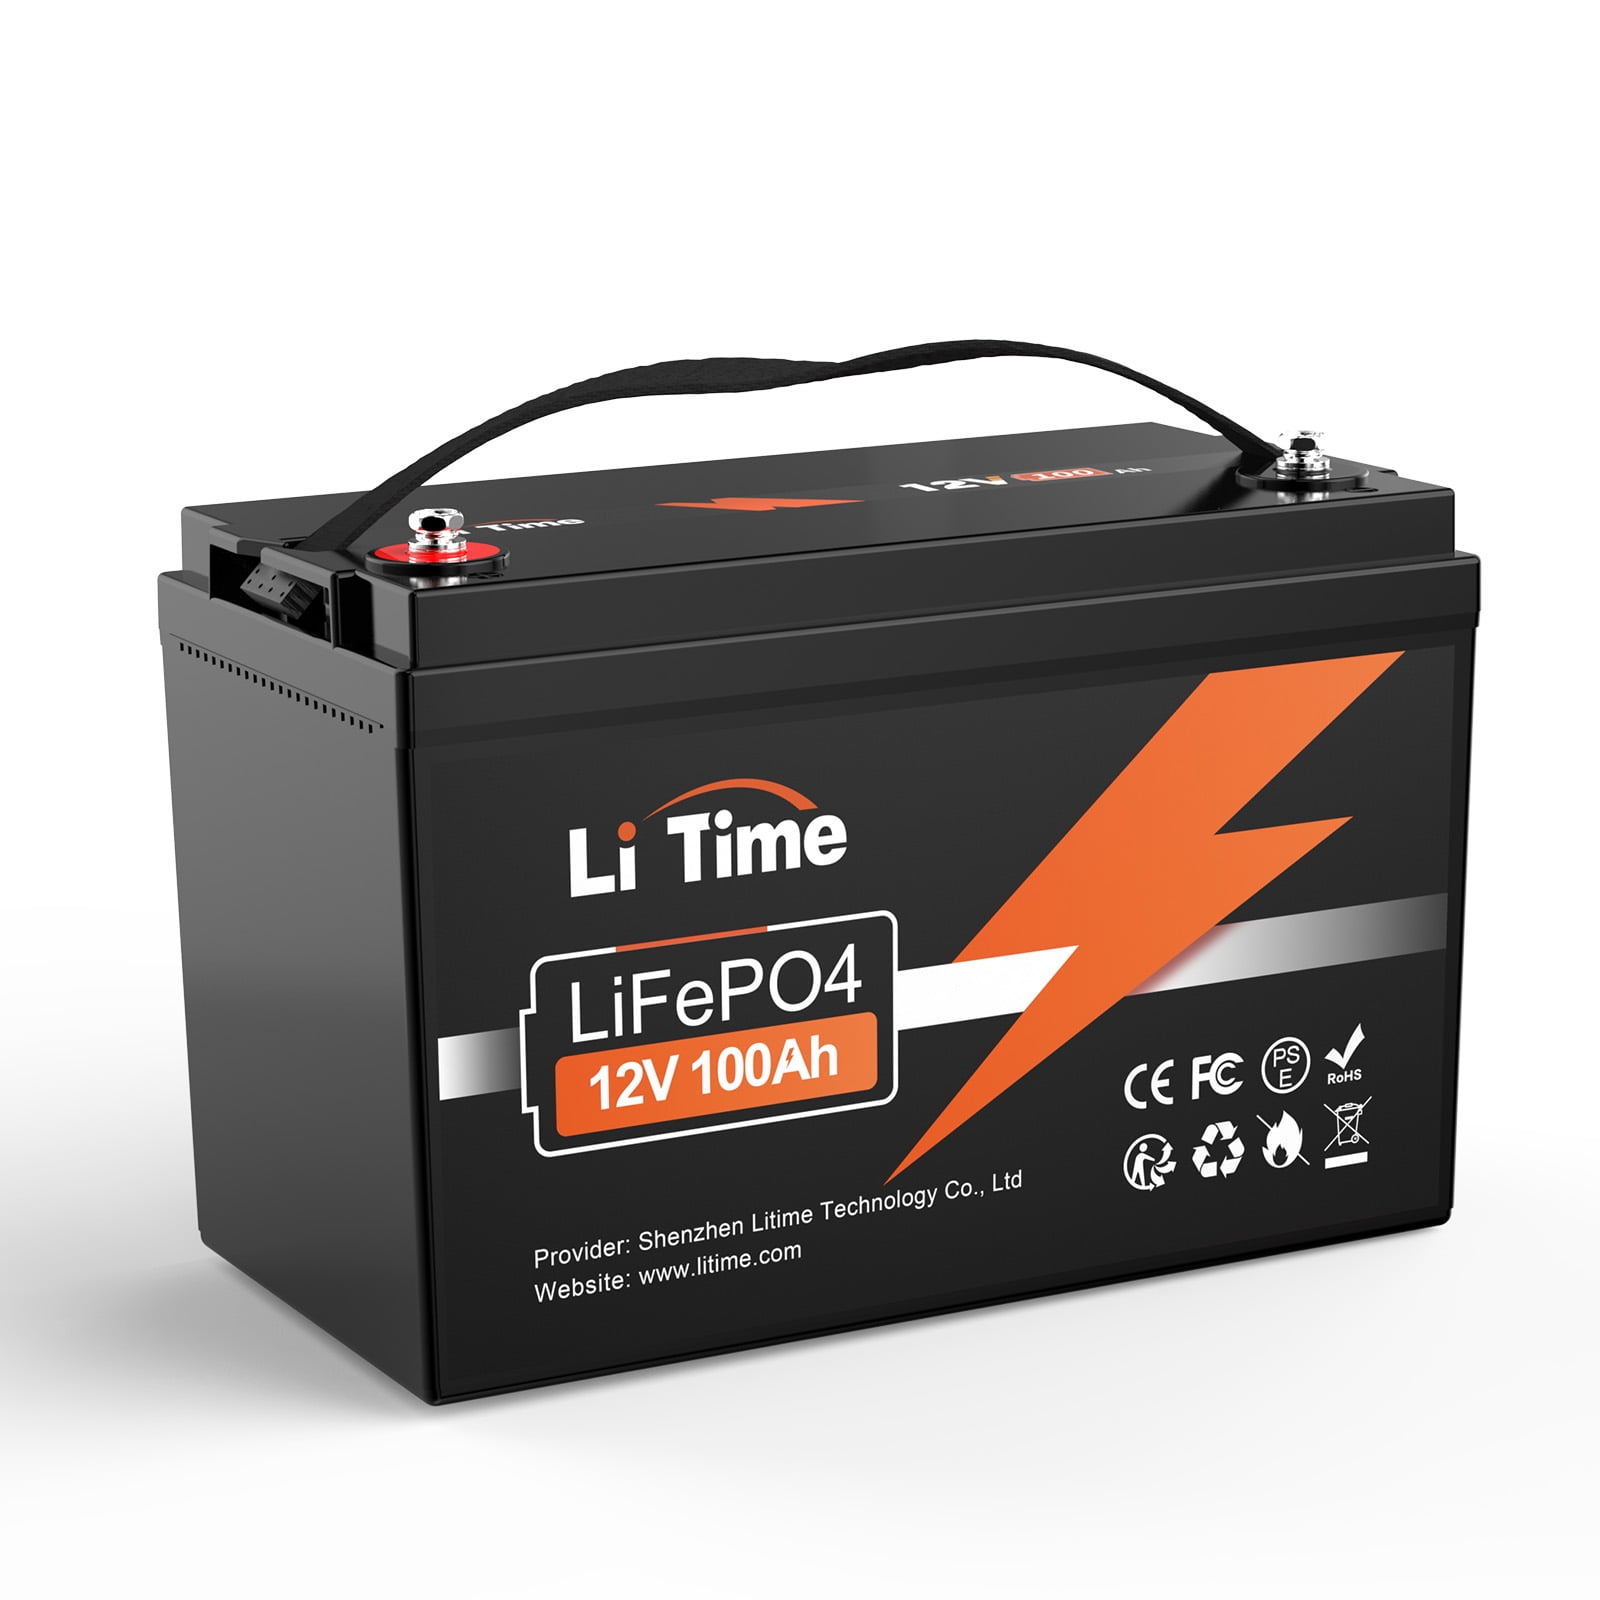 LiTime 12V 100Ah Lithium LiFePO4 Battery 4000-15000 Cycles for RV